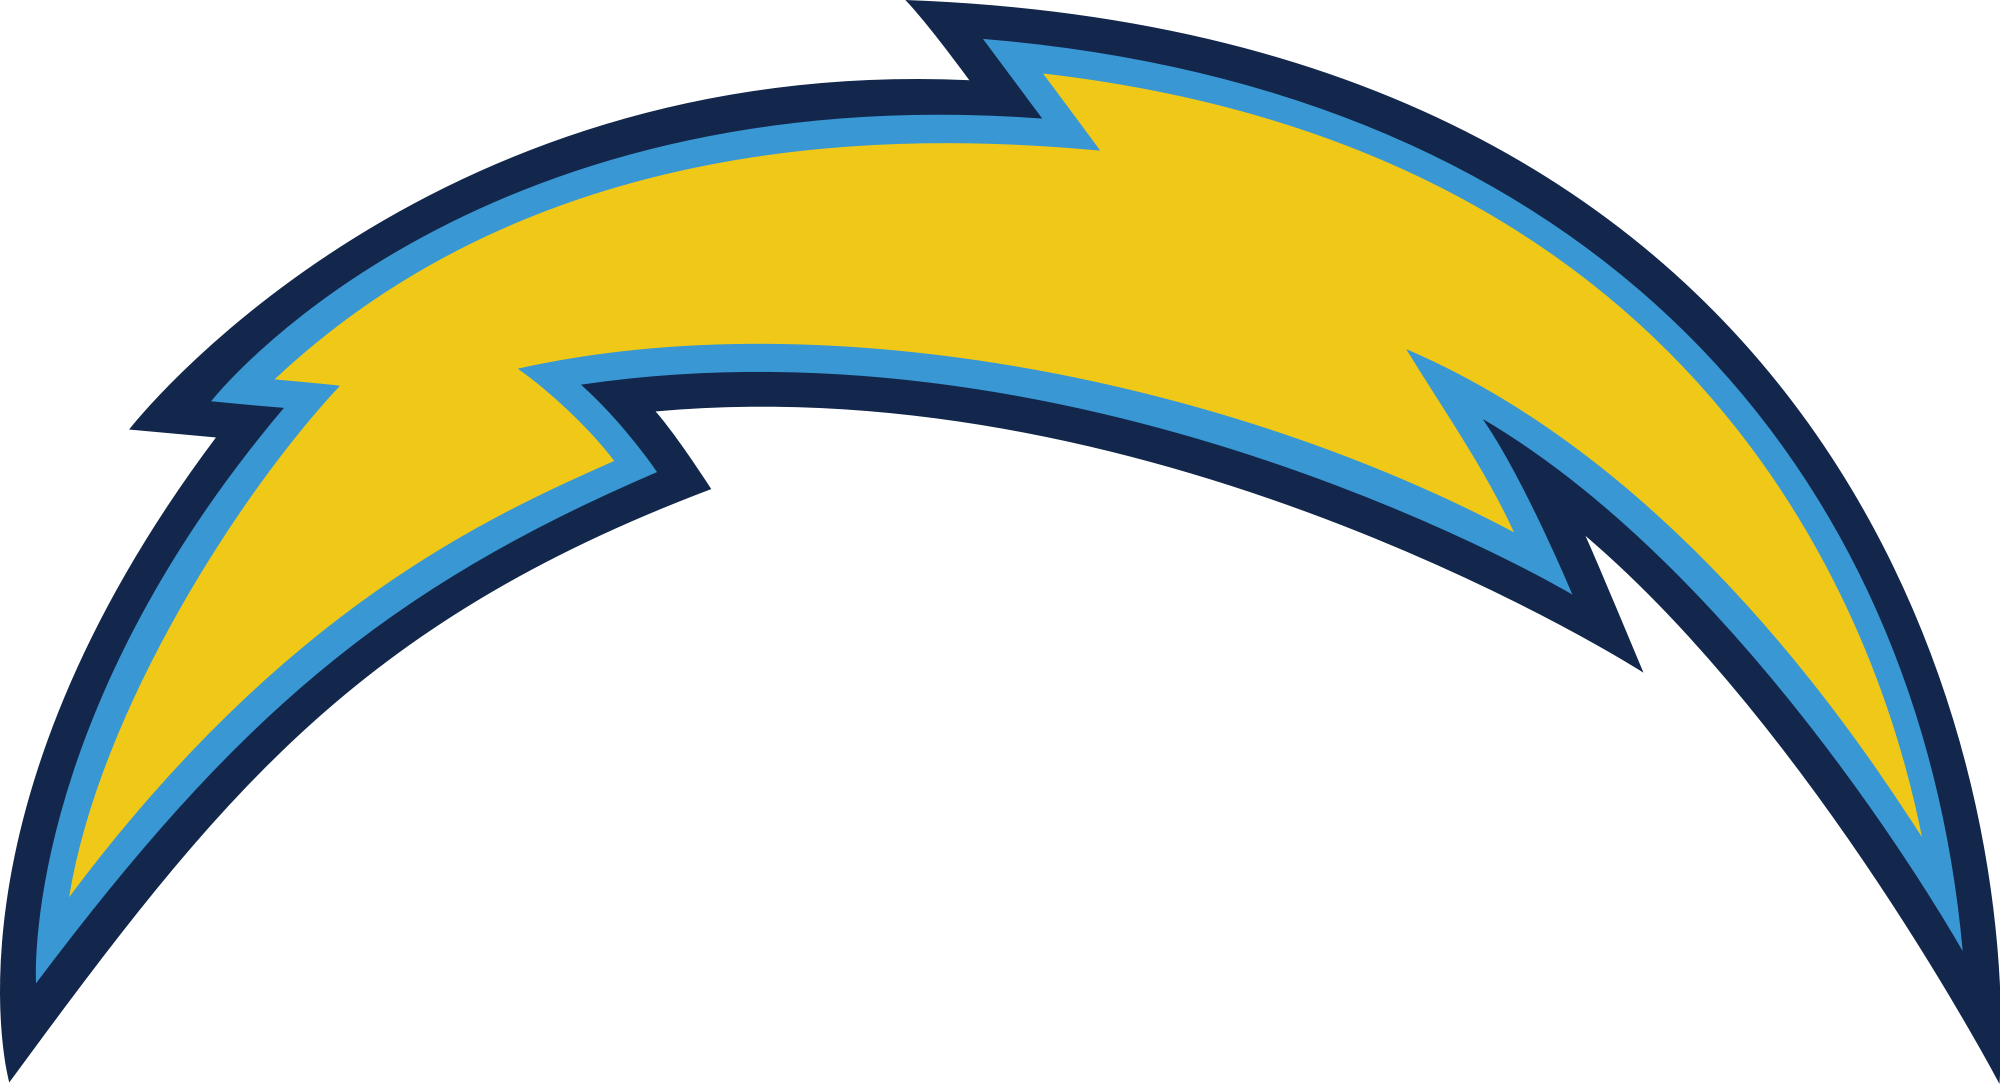 San Diego Chargers Wallpaper